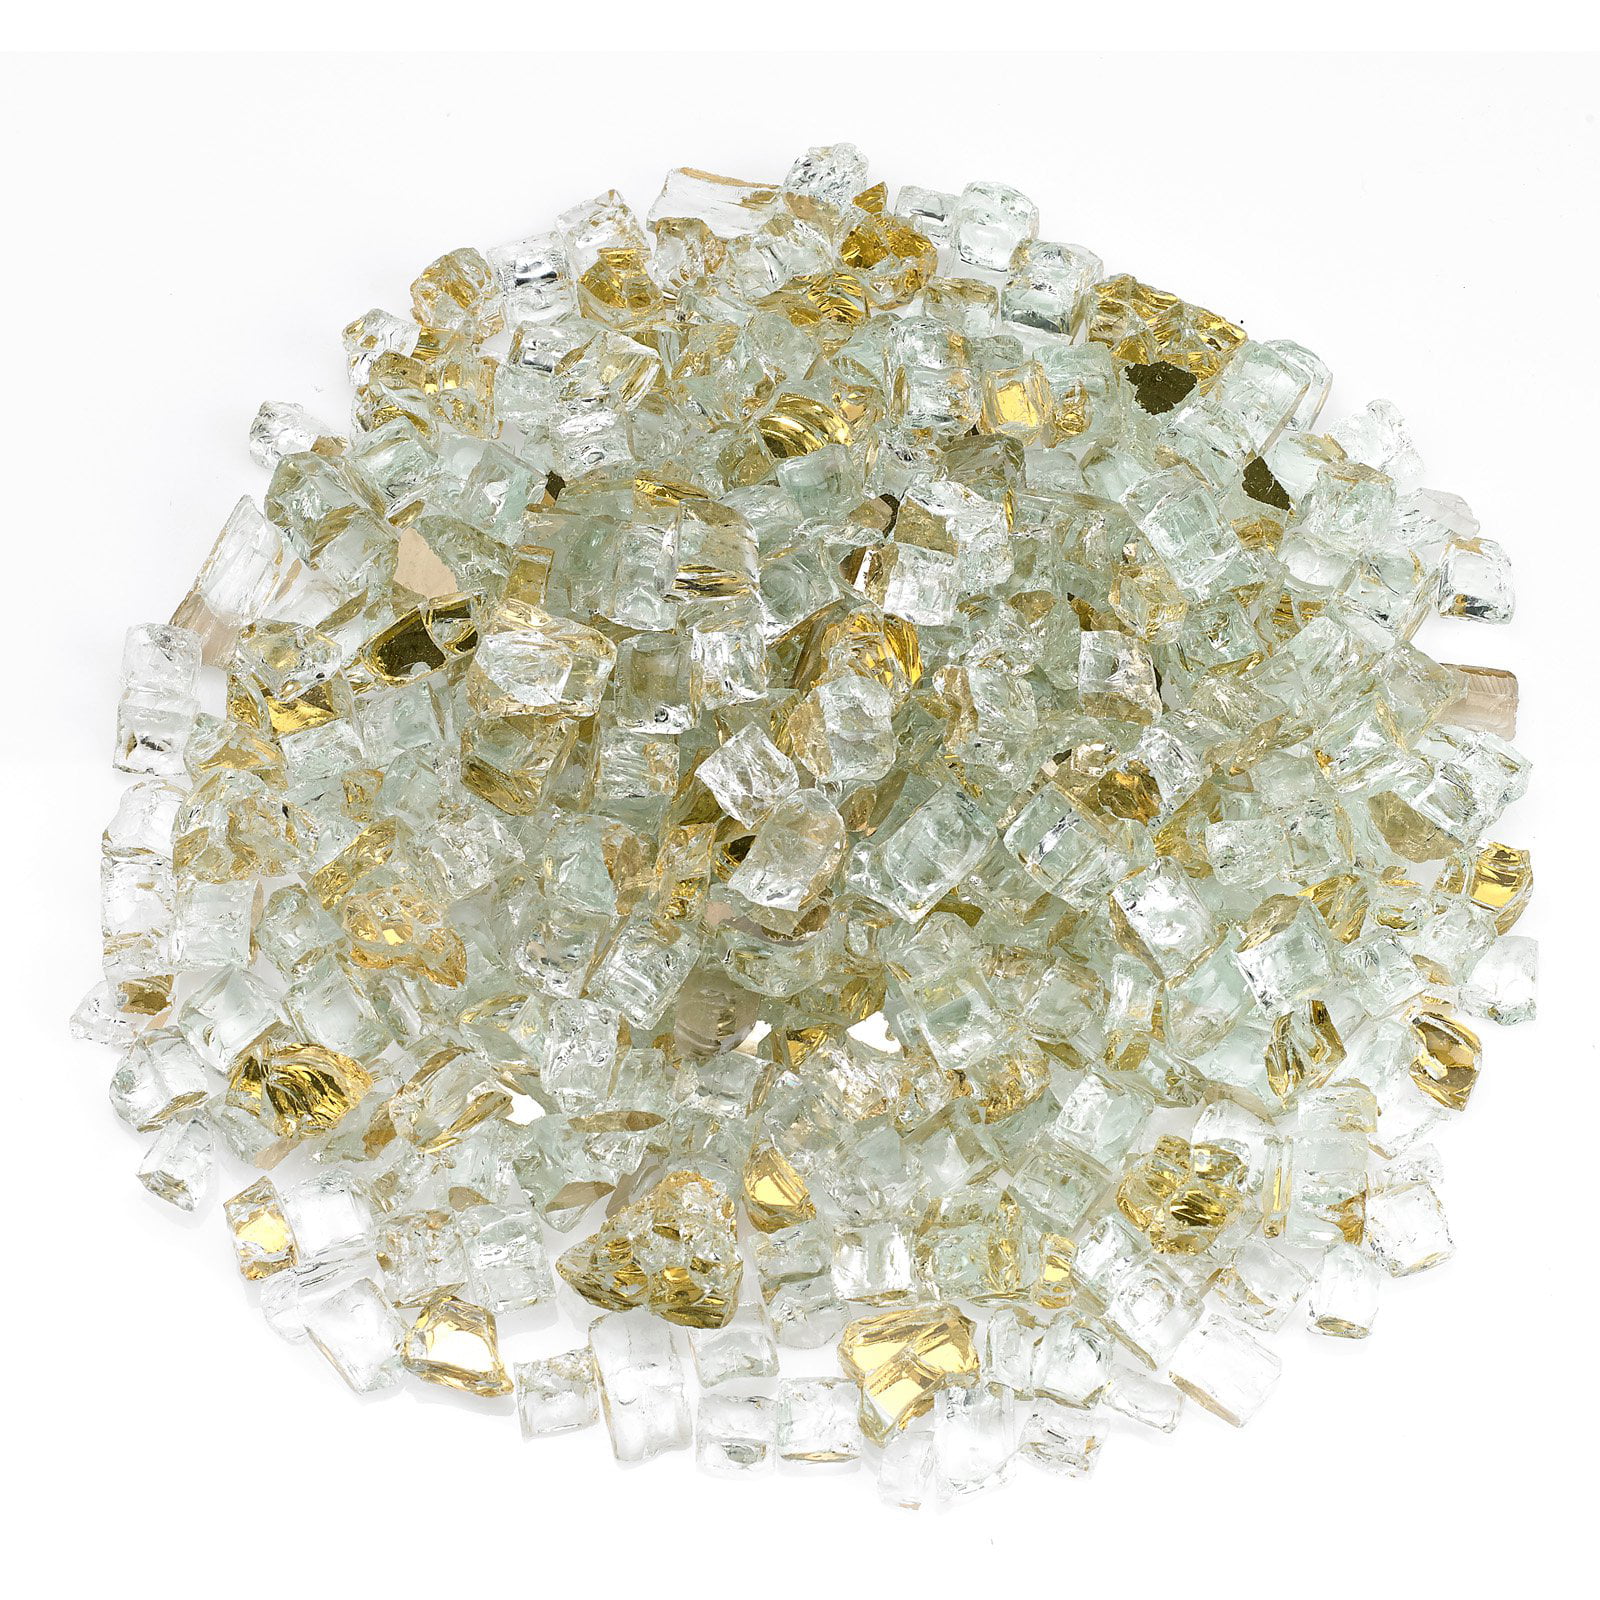 Picture of American Fireglass AFF-GDRF12-10 0.5 in. Gold Reflective Fire Glass - 10 lbs